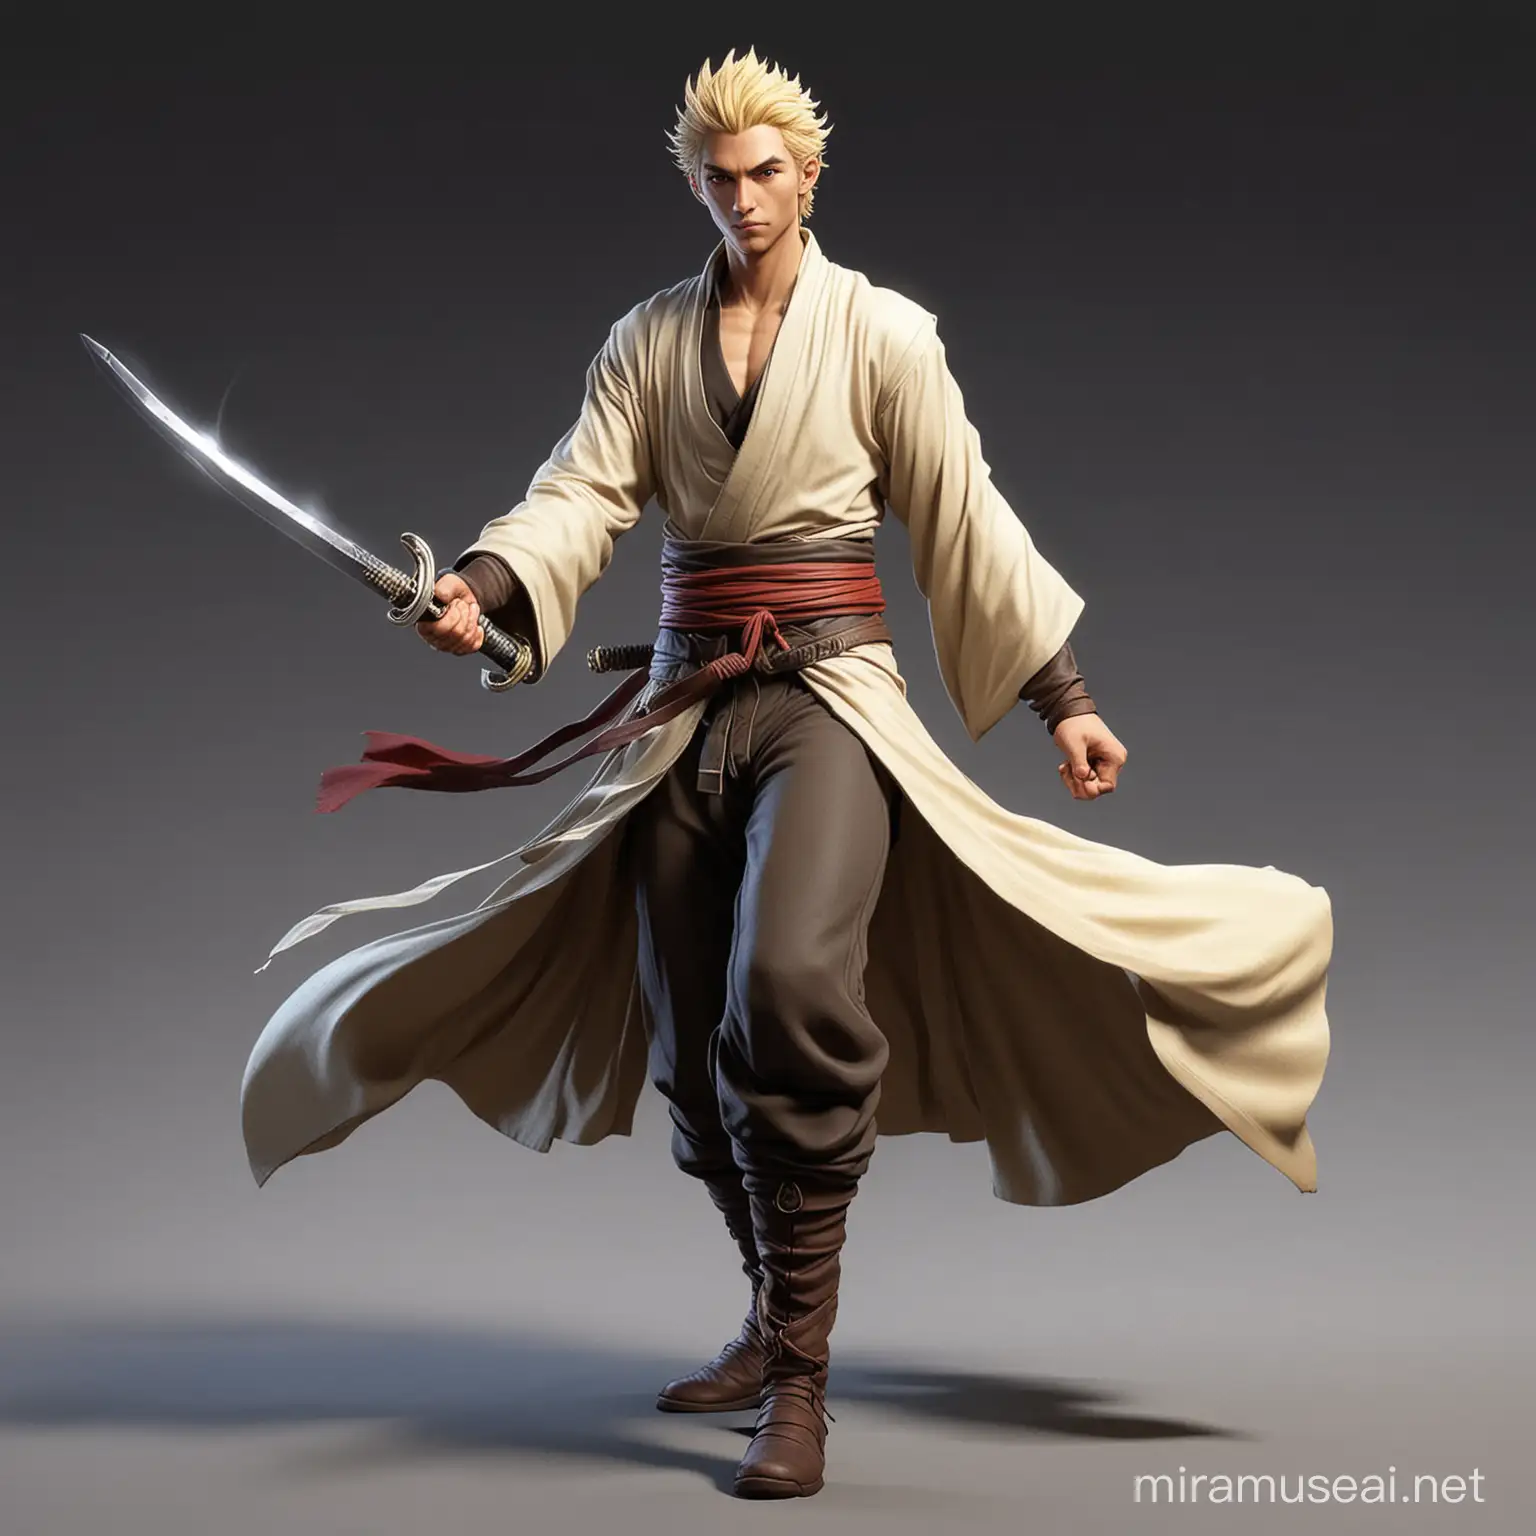 half elf, monk, male, light skinned, flowing robes, kung fu stance, with short sword, cowboy bebop bounty hunter space themed